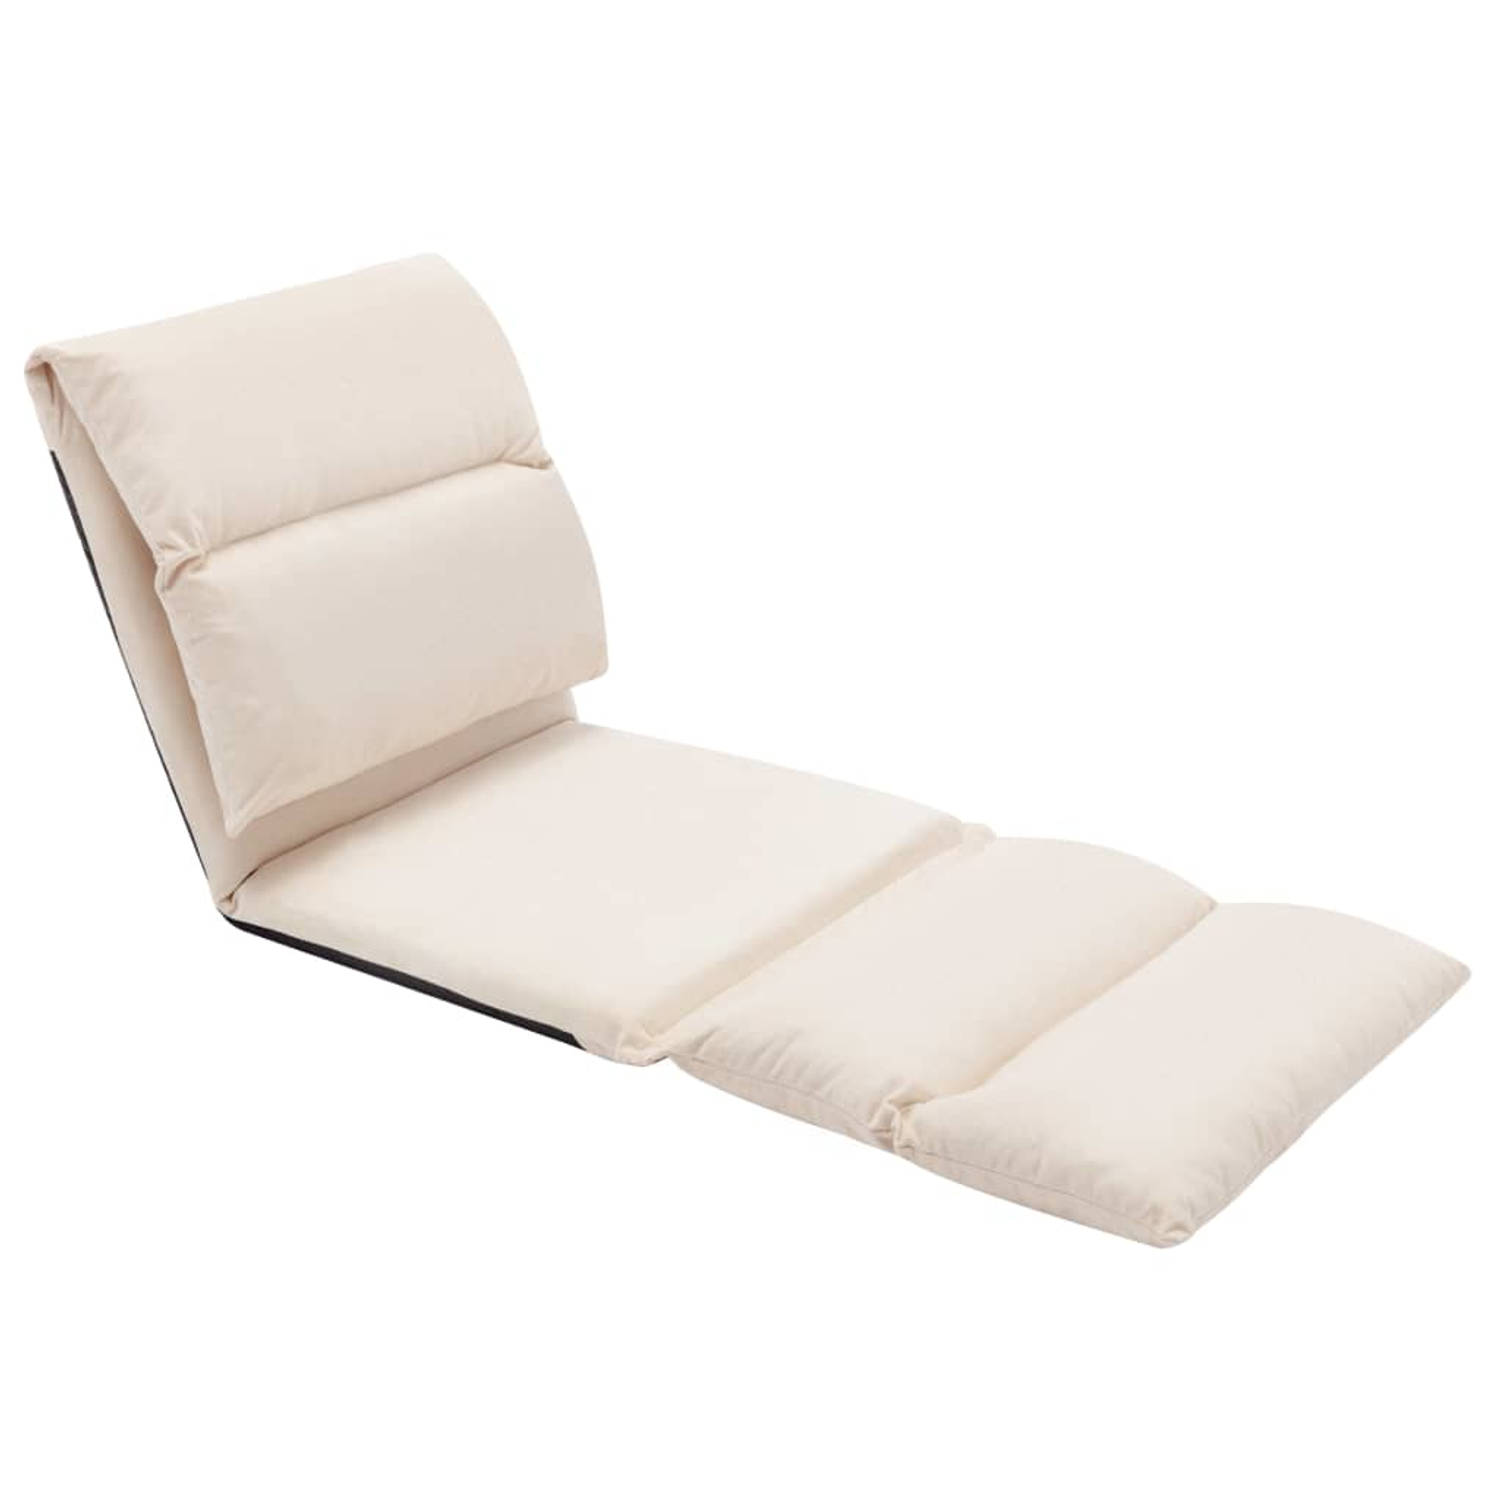 The Living Store Vloerstoel Loungebed - Crème - 216 x 56 x 9 cm - Microvezel